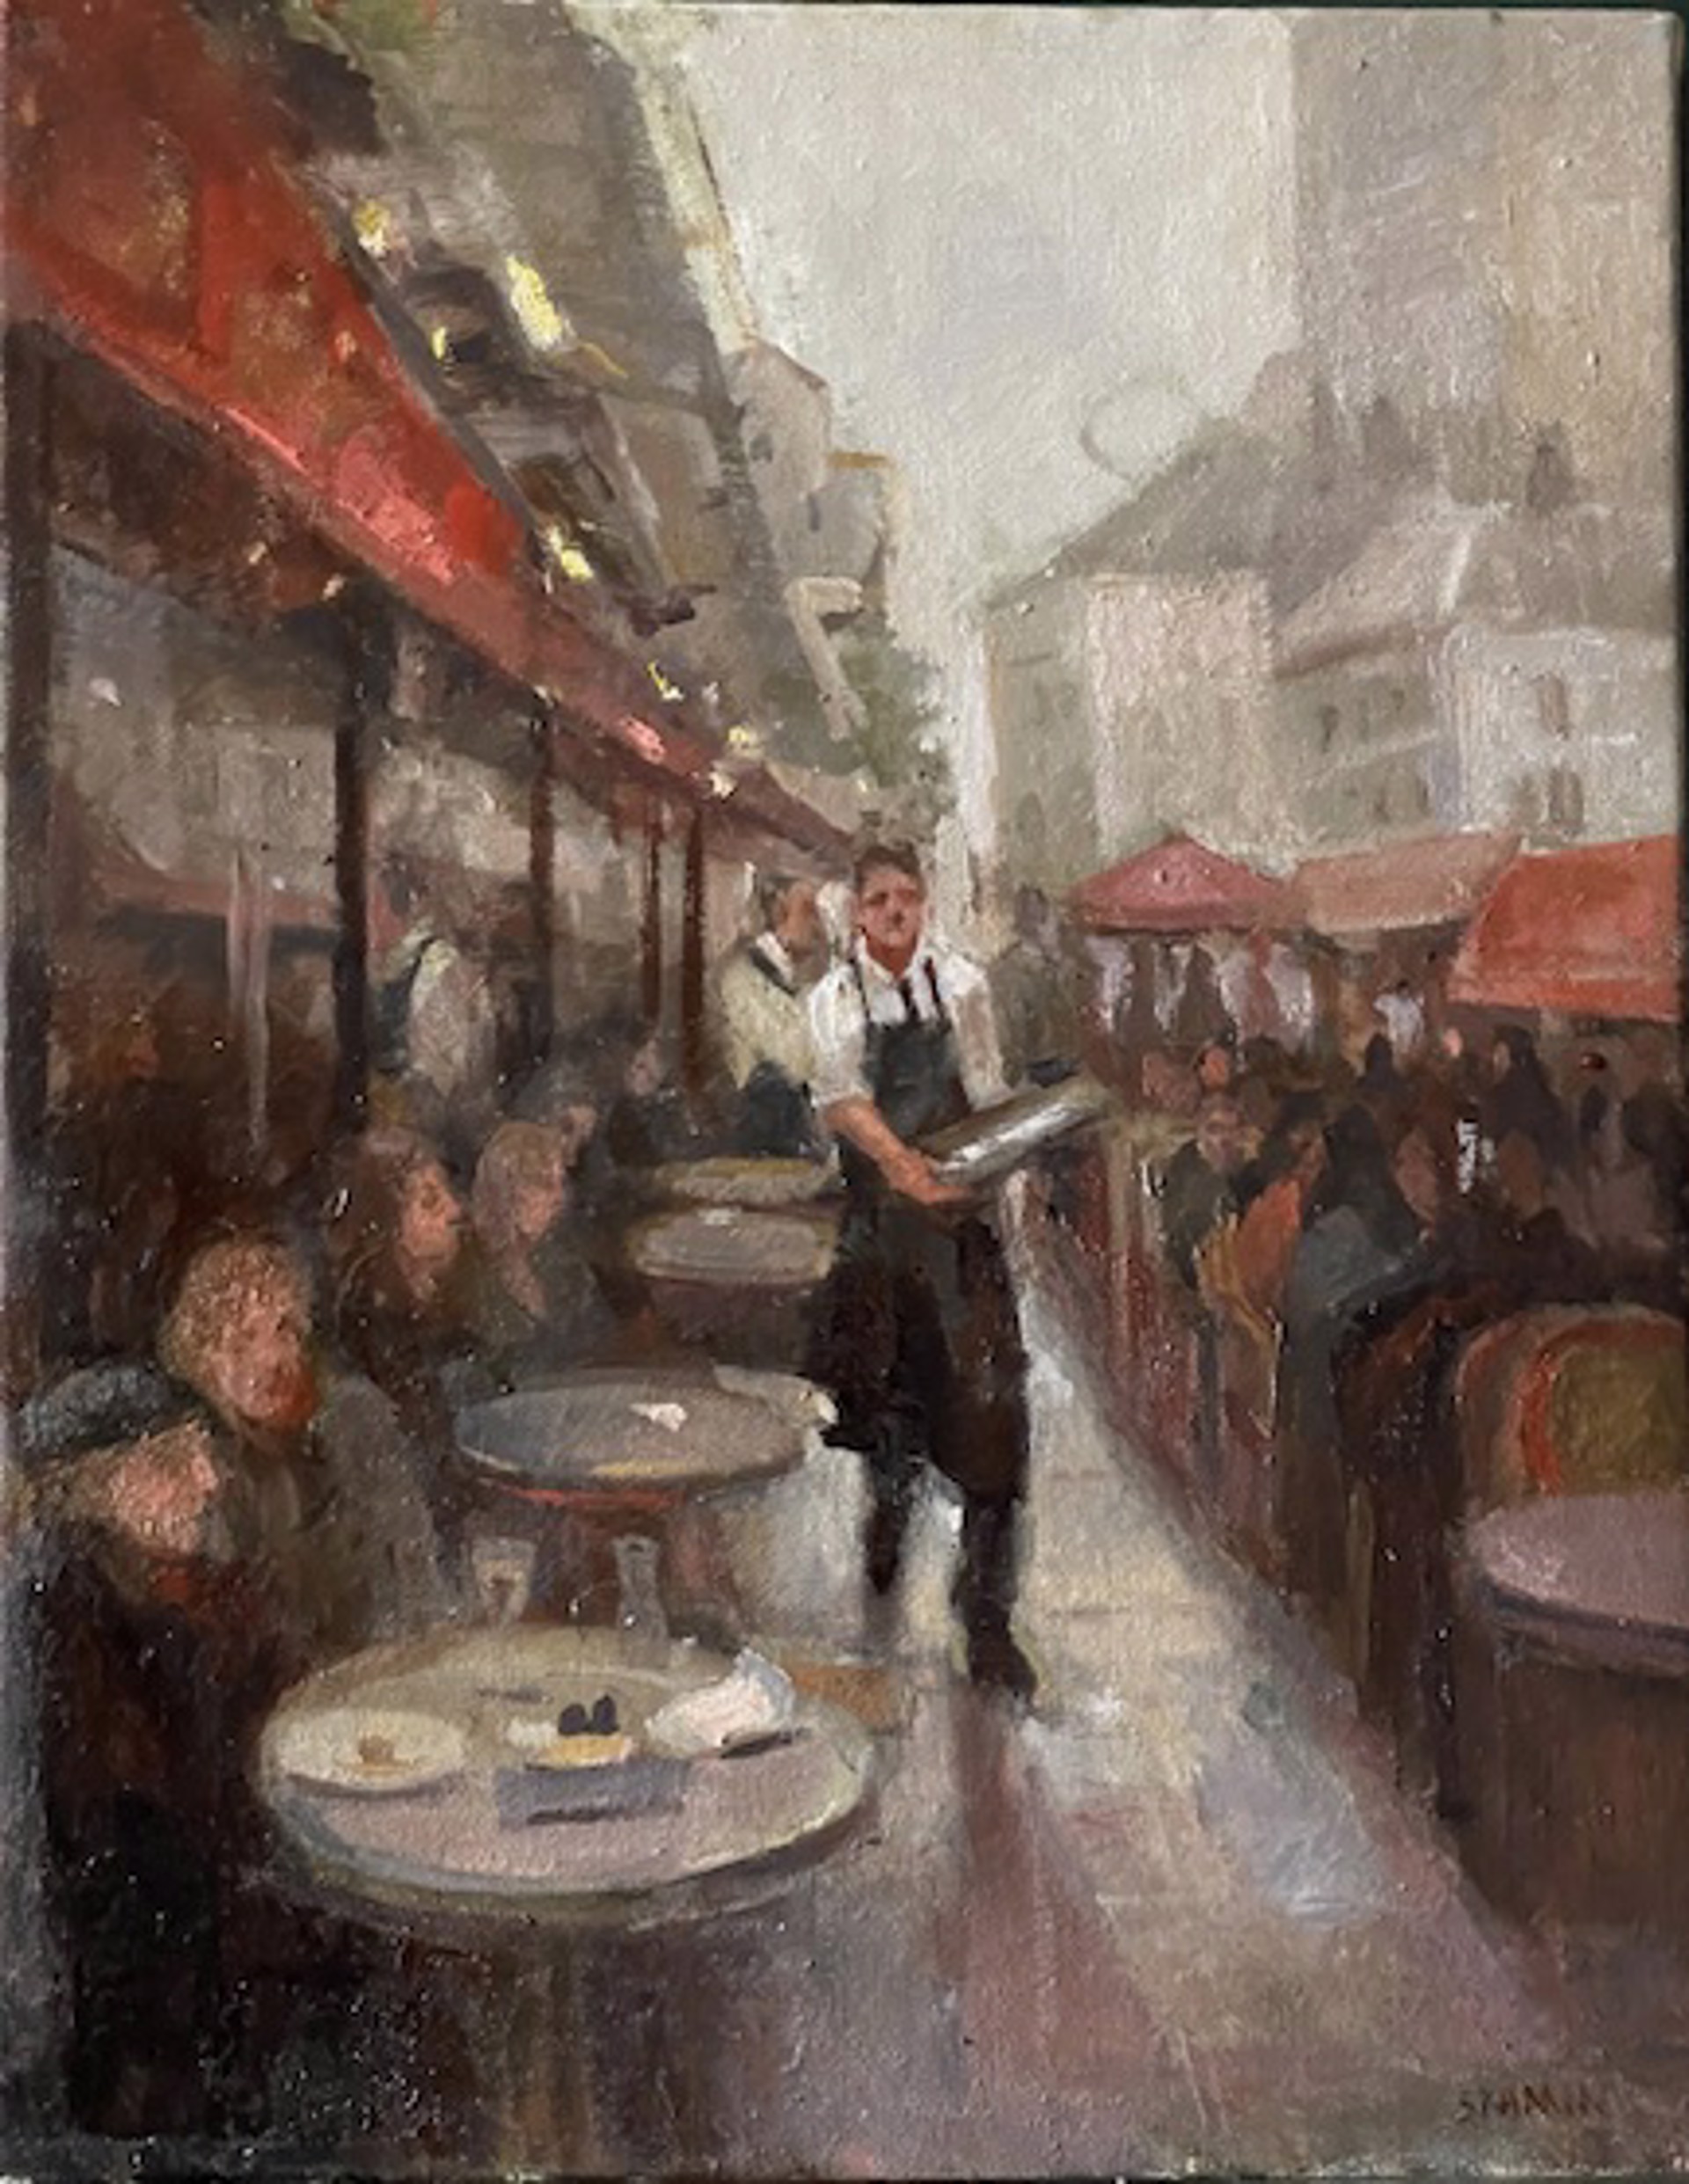 Waiter in Paris by Stacy Kamin